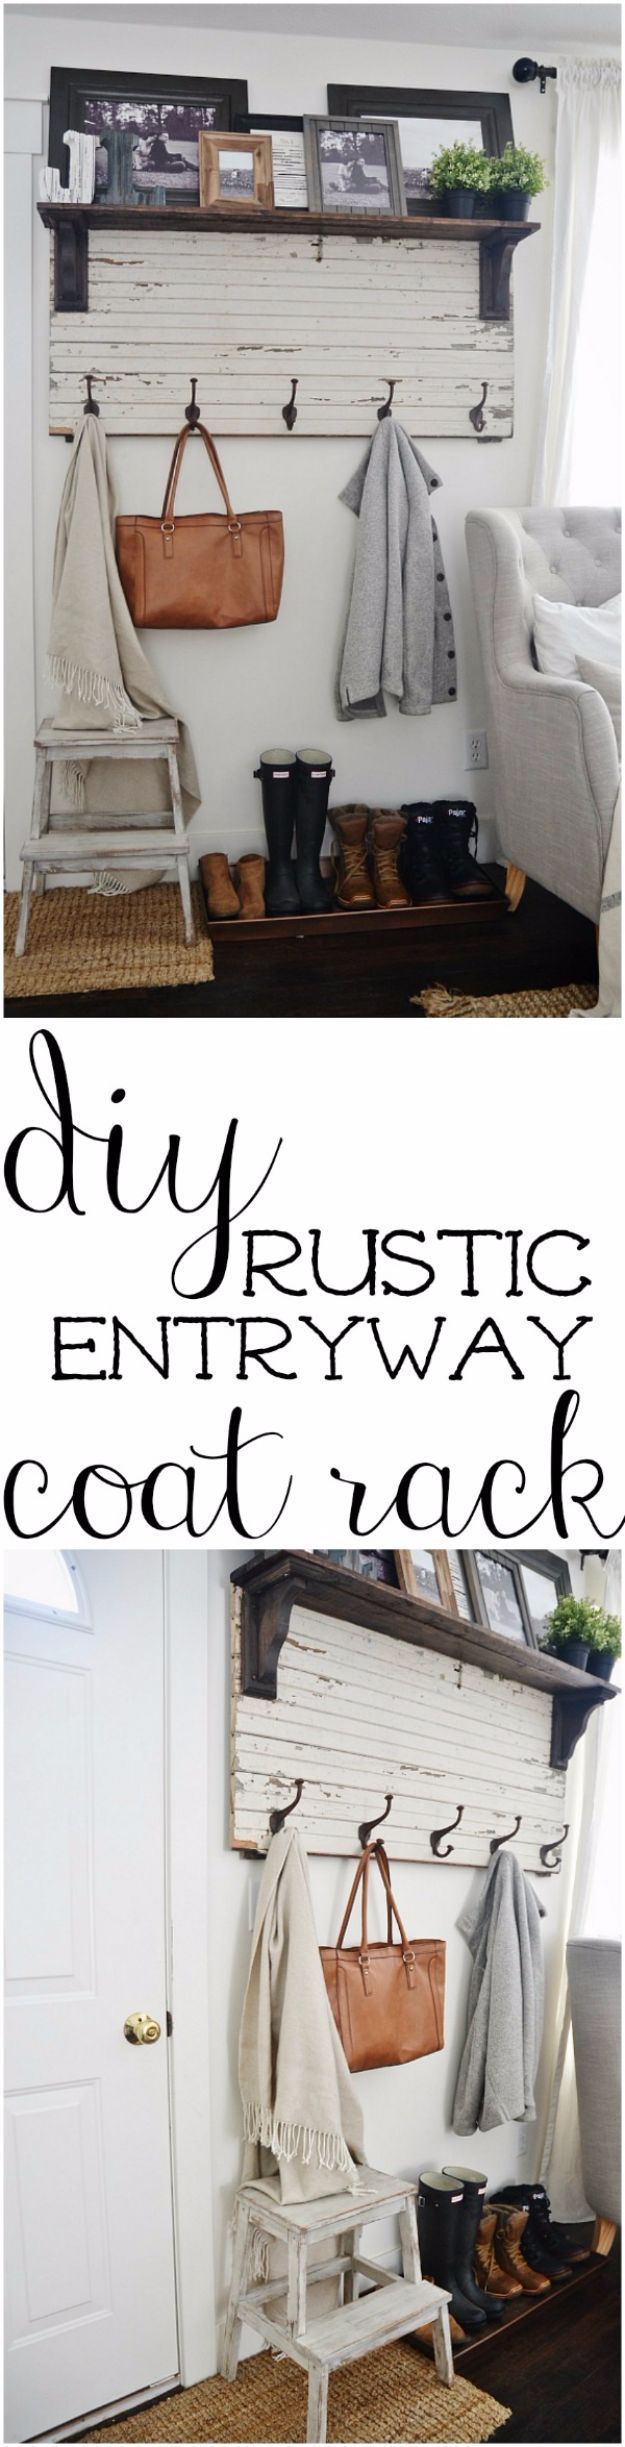 Best Country Decor Ideas – DIY Rustic Entryway Coat Rack – Rustic Farmhouse Decor Tutorials and Easy Vintage Shabby Chic Home